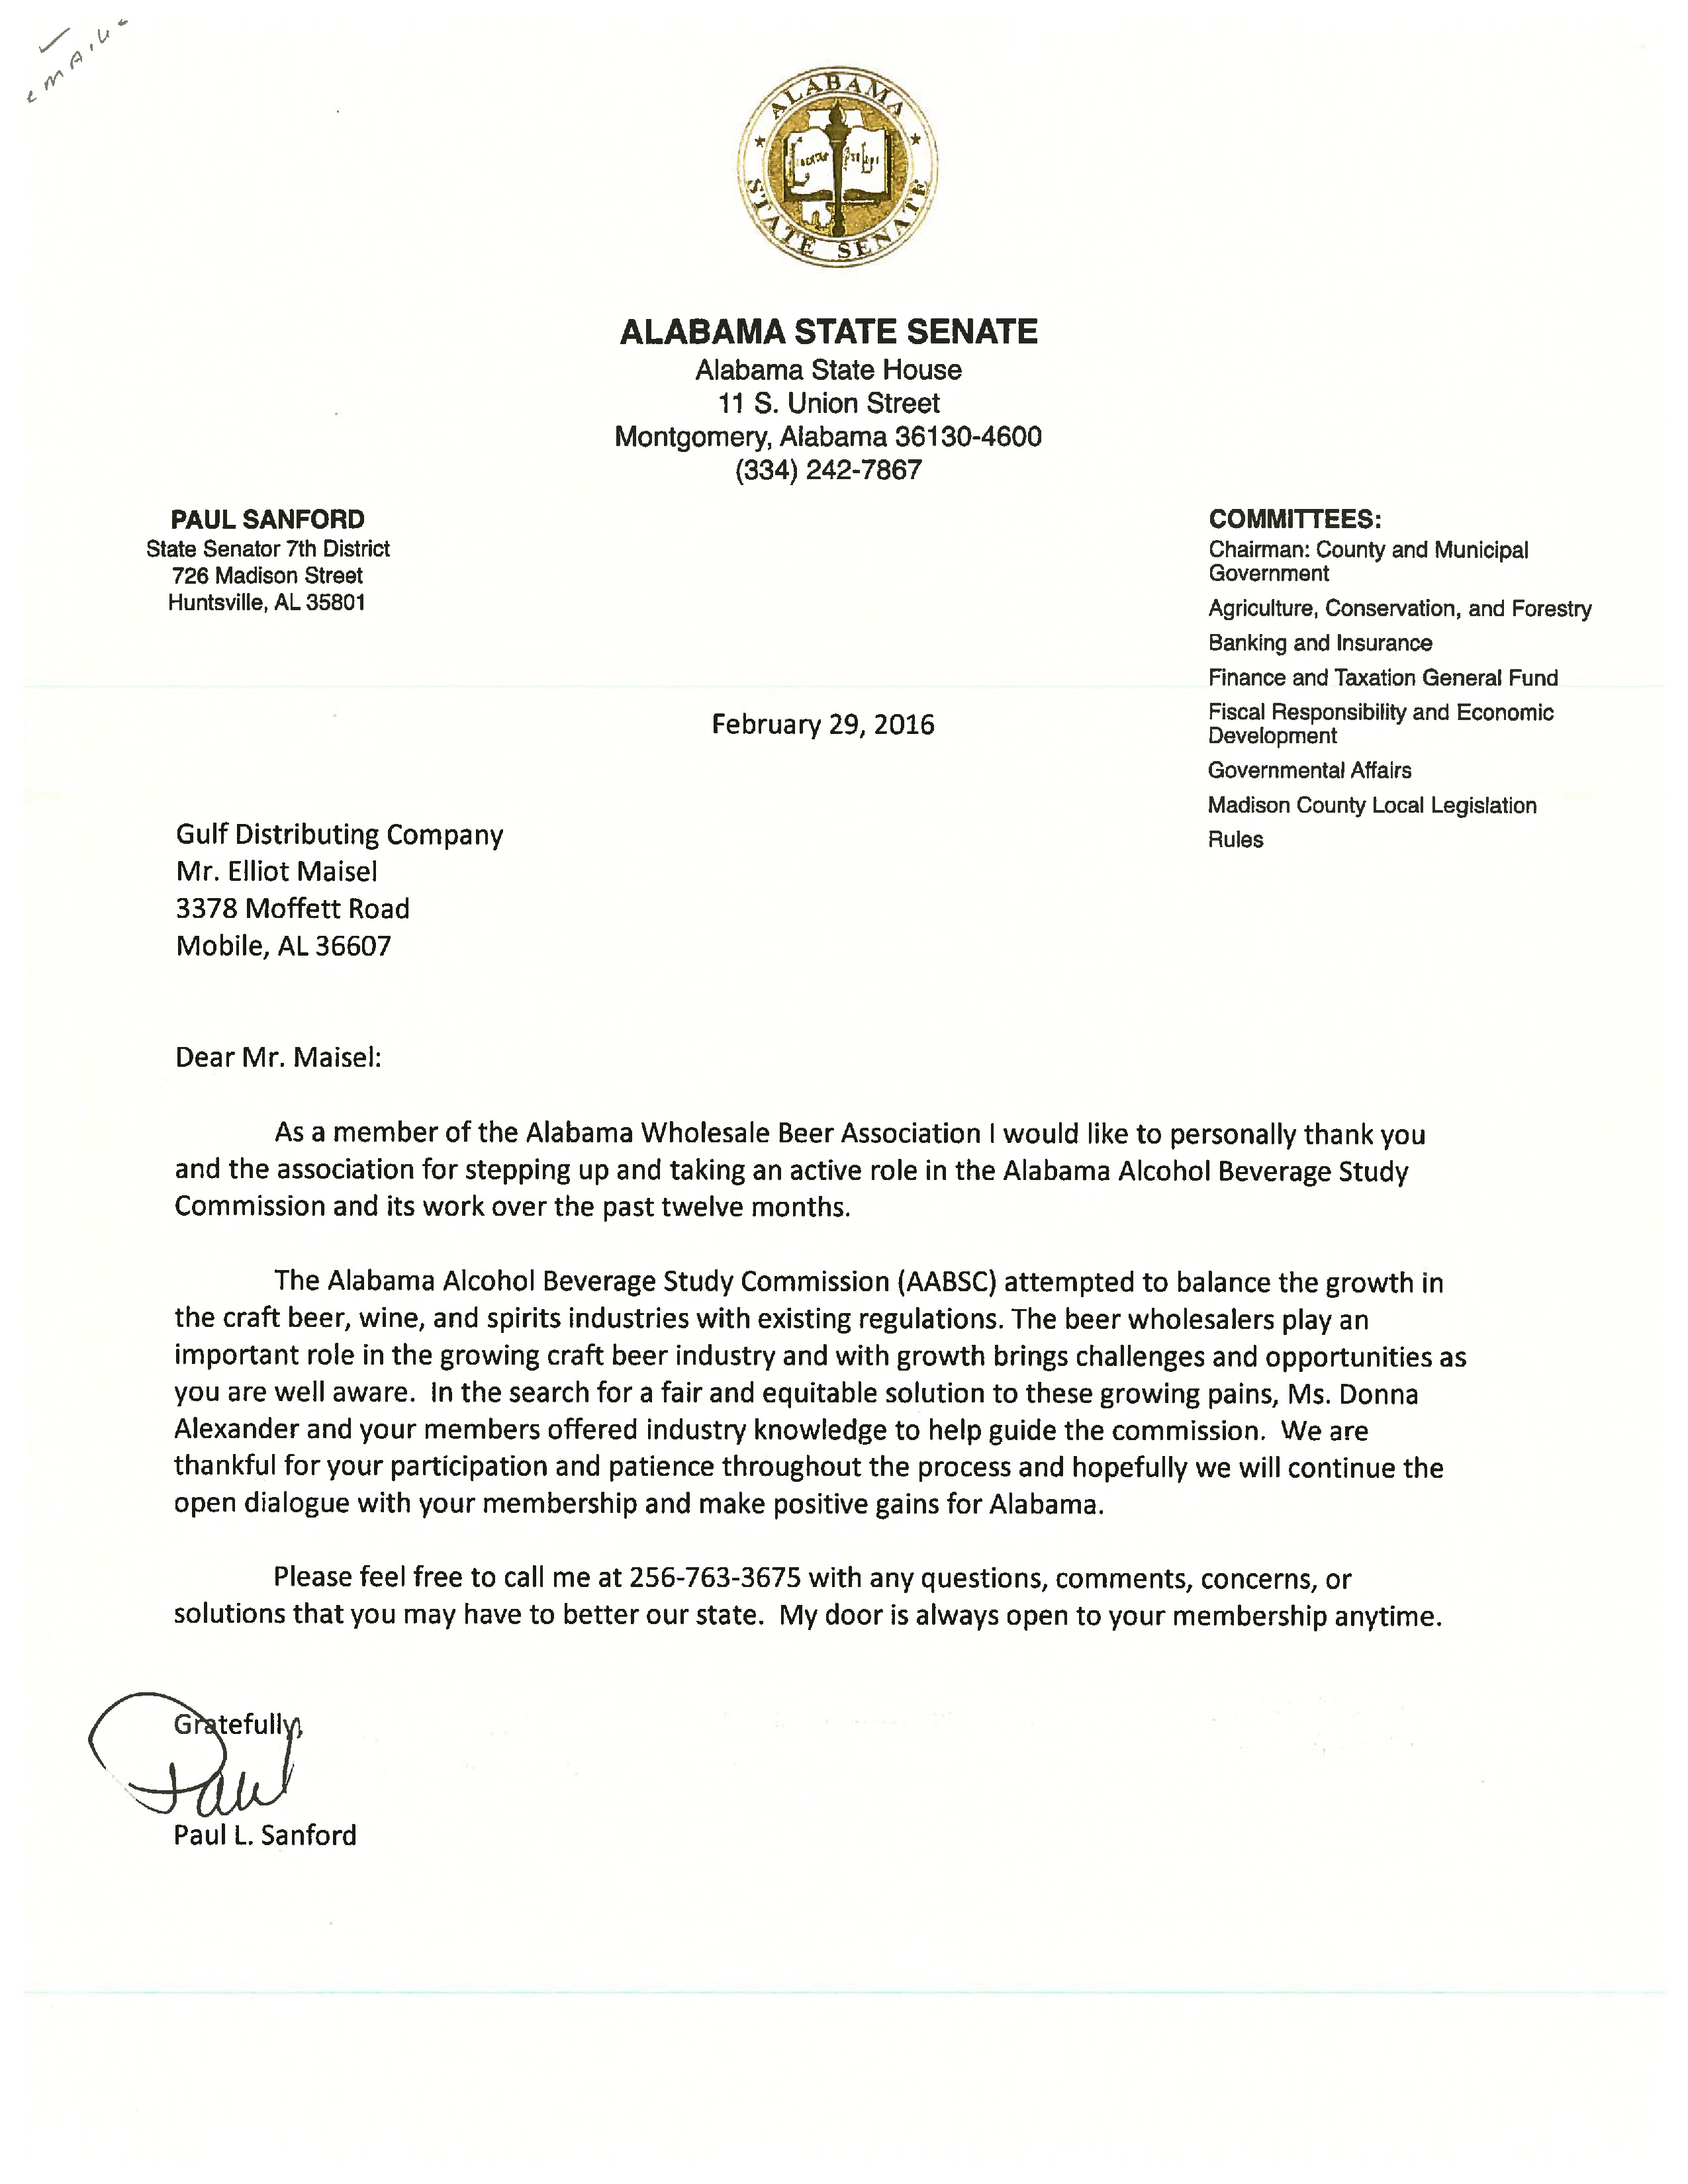 Special thanks from the Alabama State Senate 